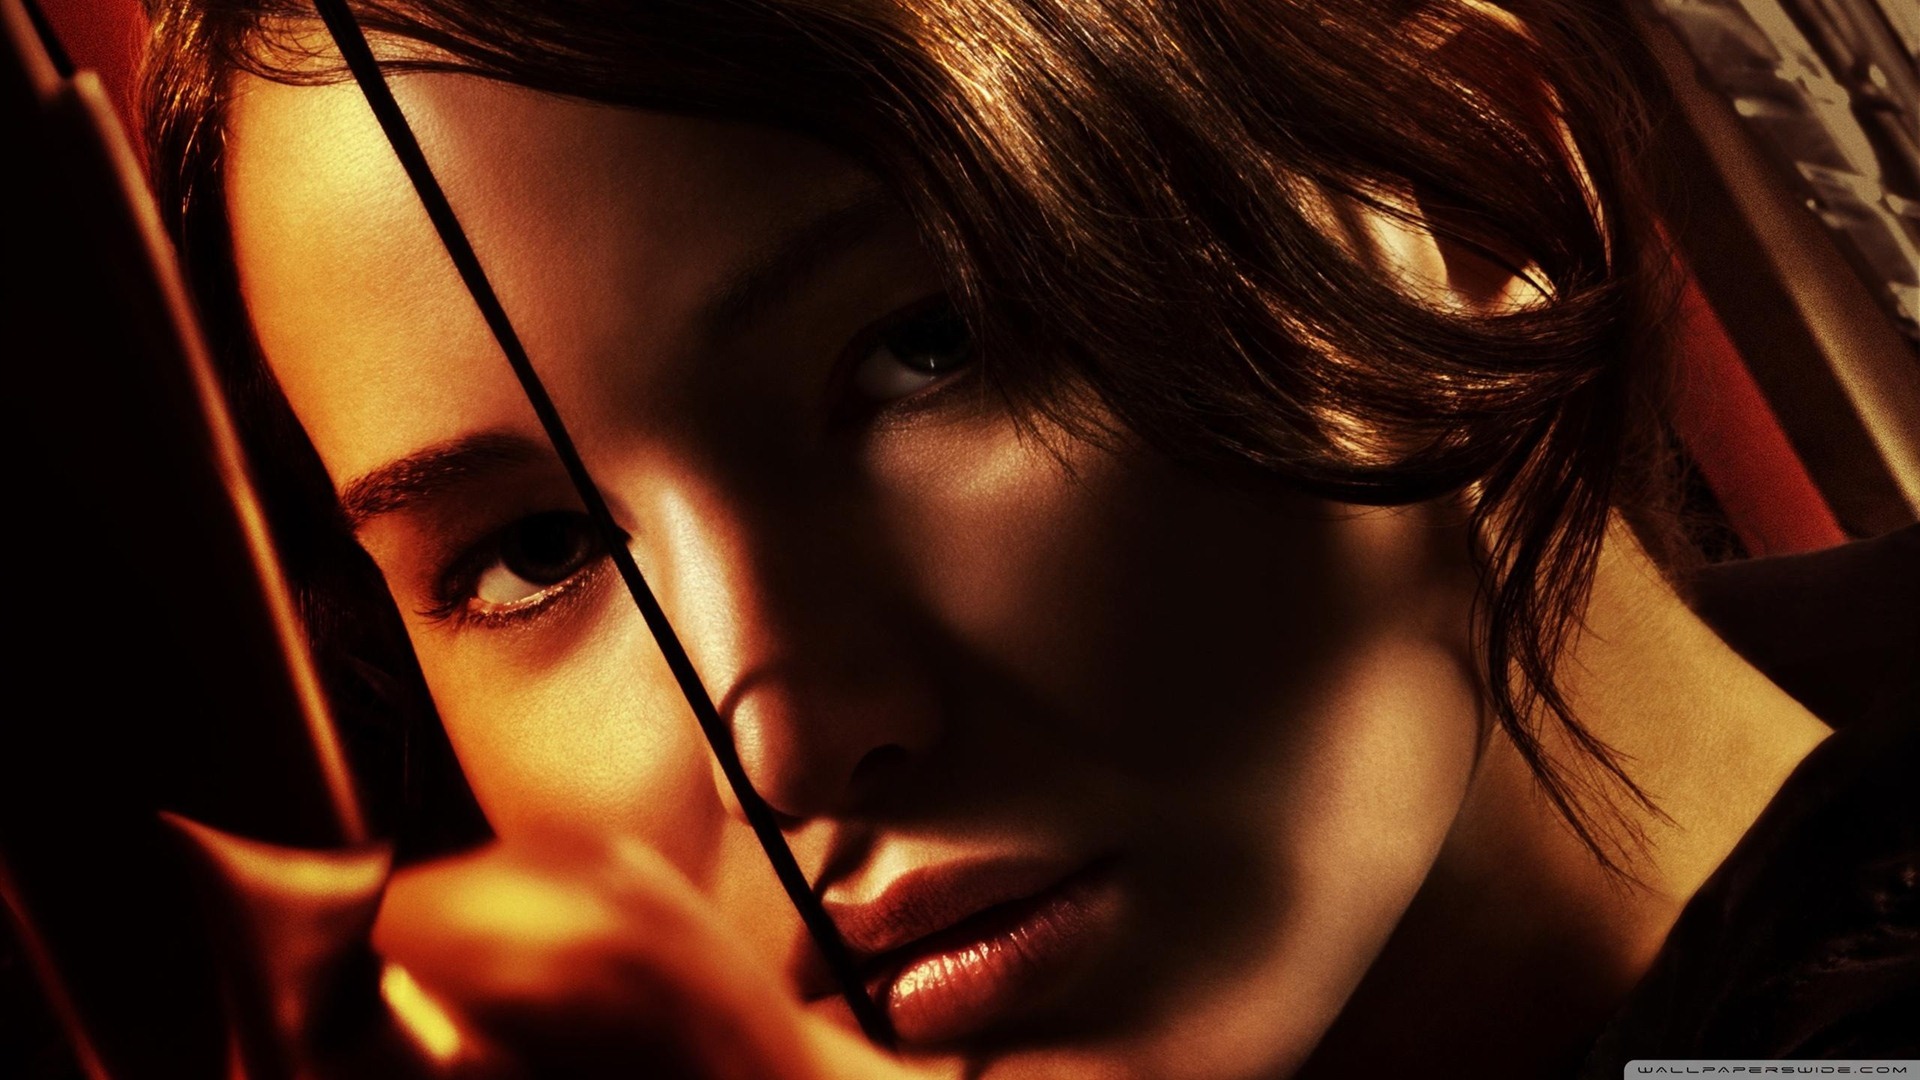 The Hunger Games HD wallpapers #6 - 1920x1080